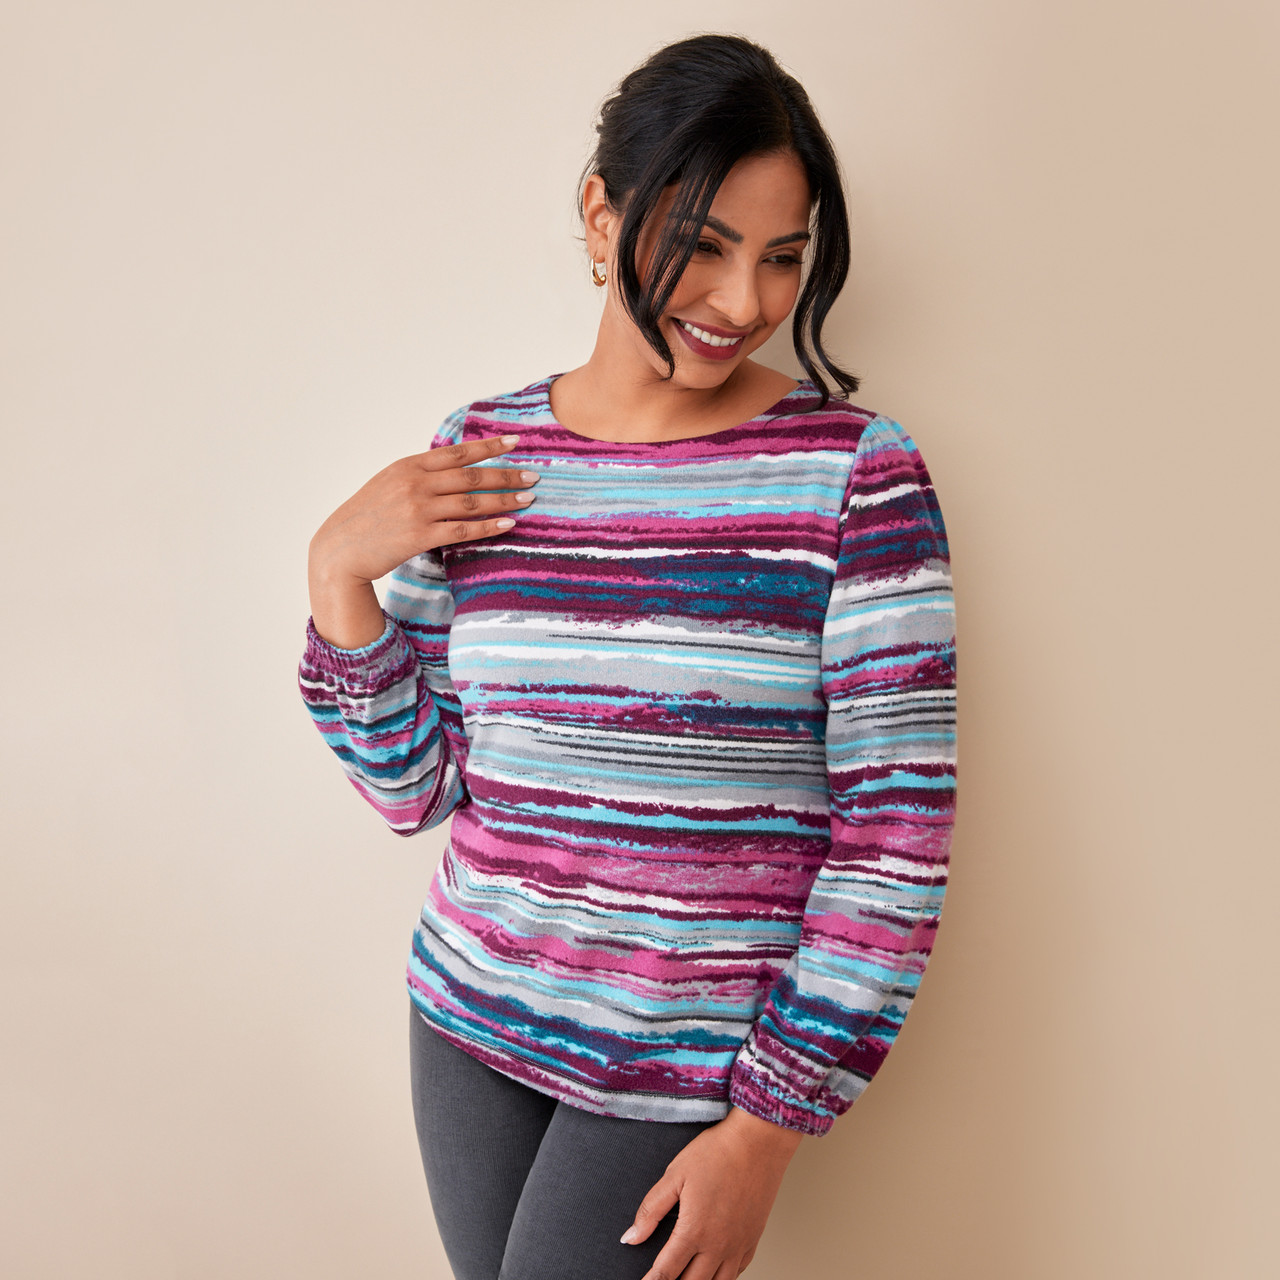 Women's Petite - Watercolour Striped Top | Northern Reflections